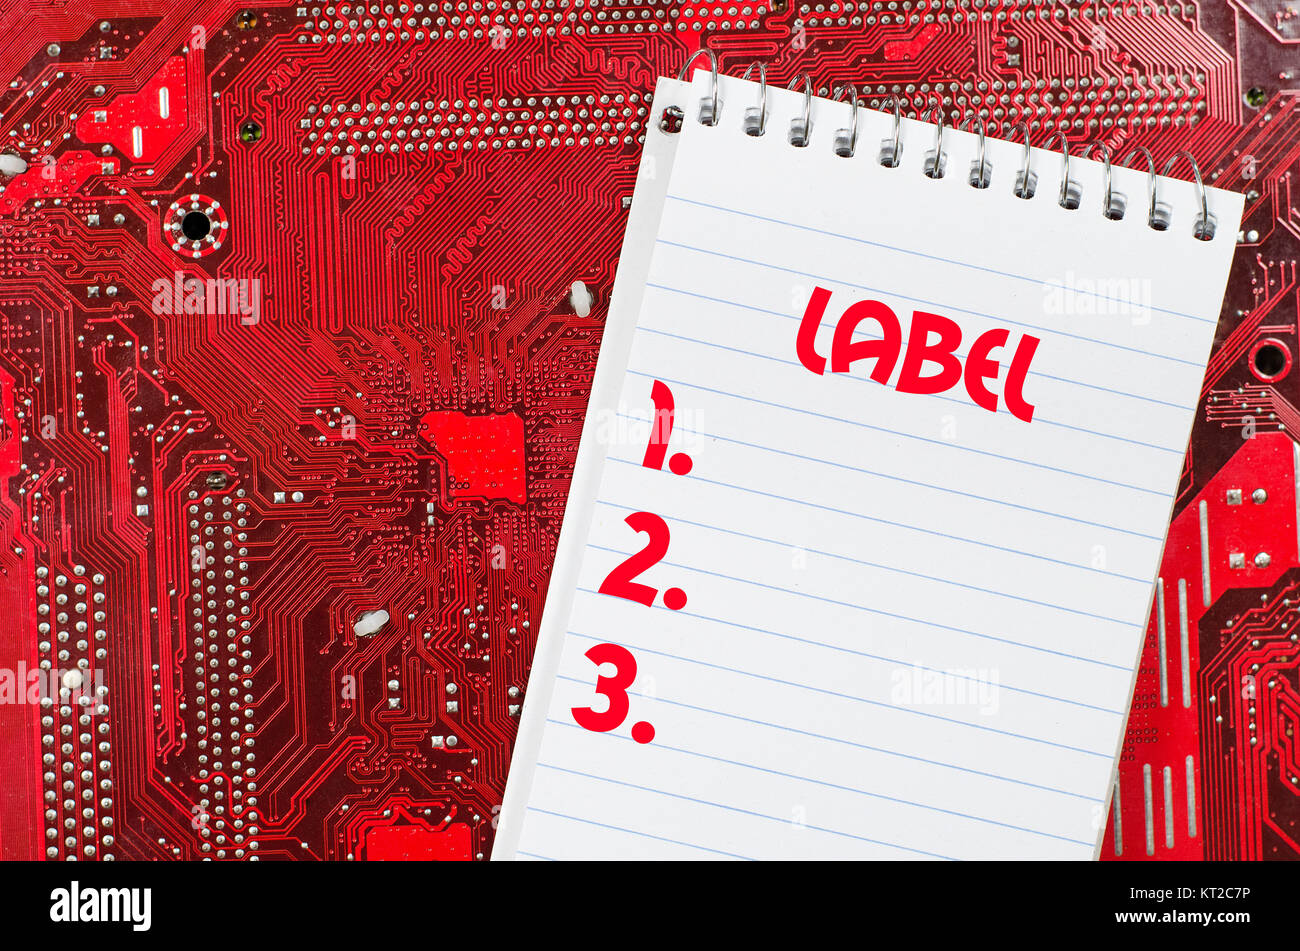 Label text concept over computer background Stock Photo